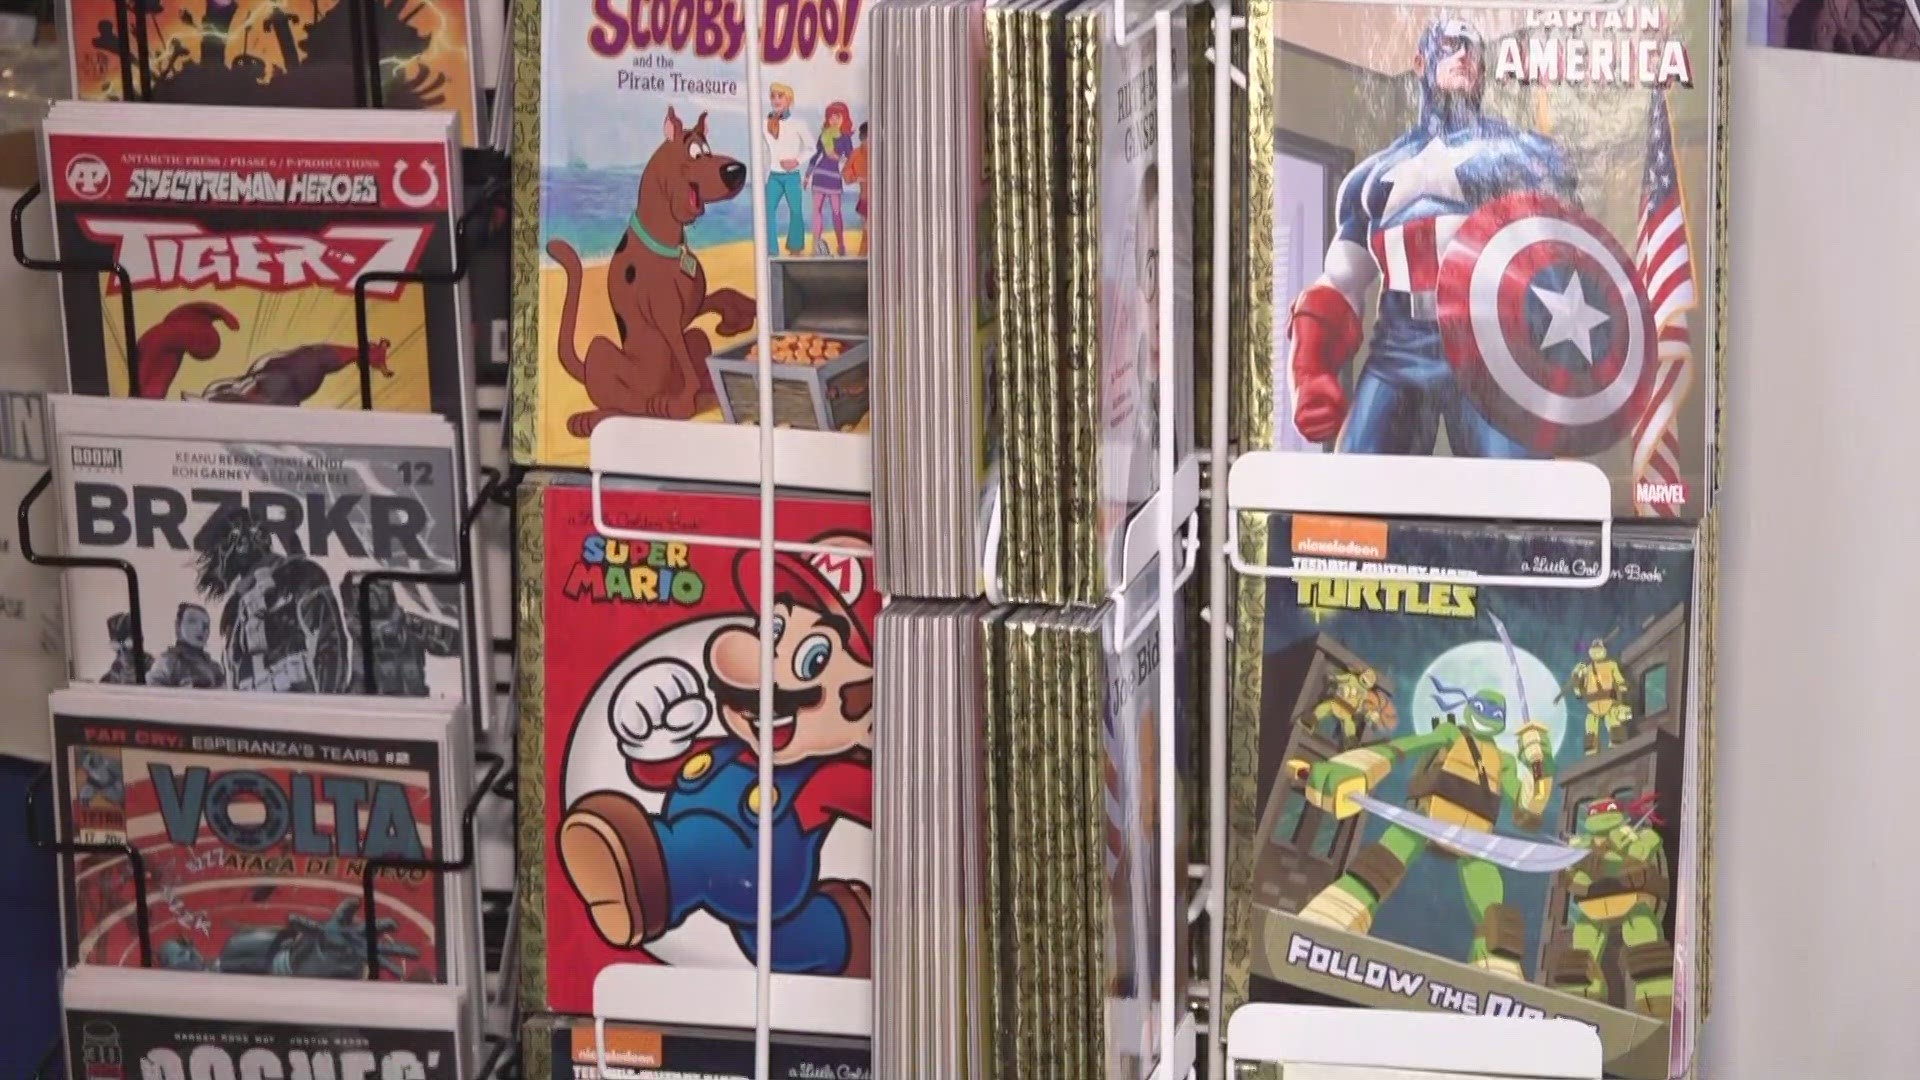 It's an annual promotion to get new readers to visit independent comic book stores.